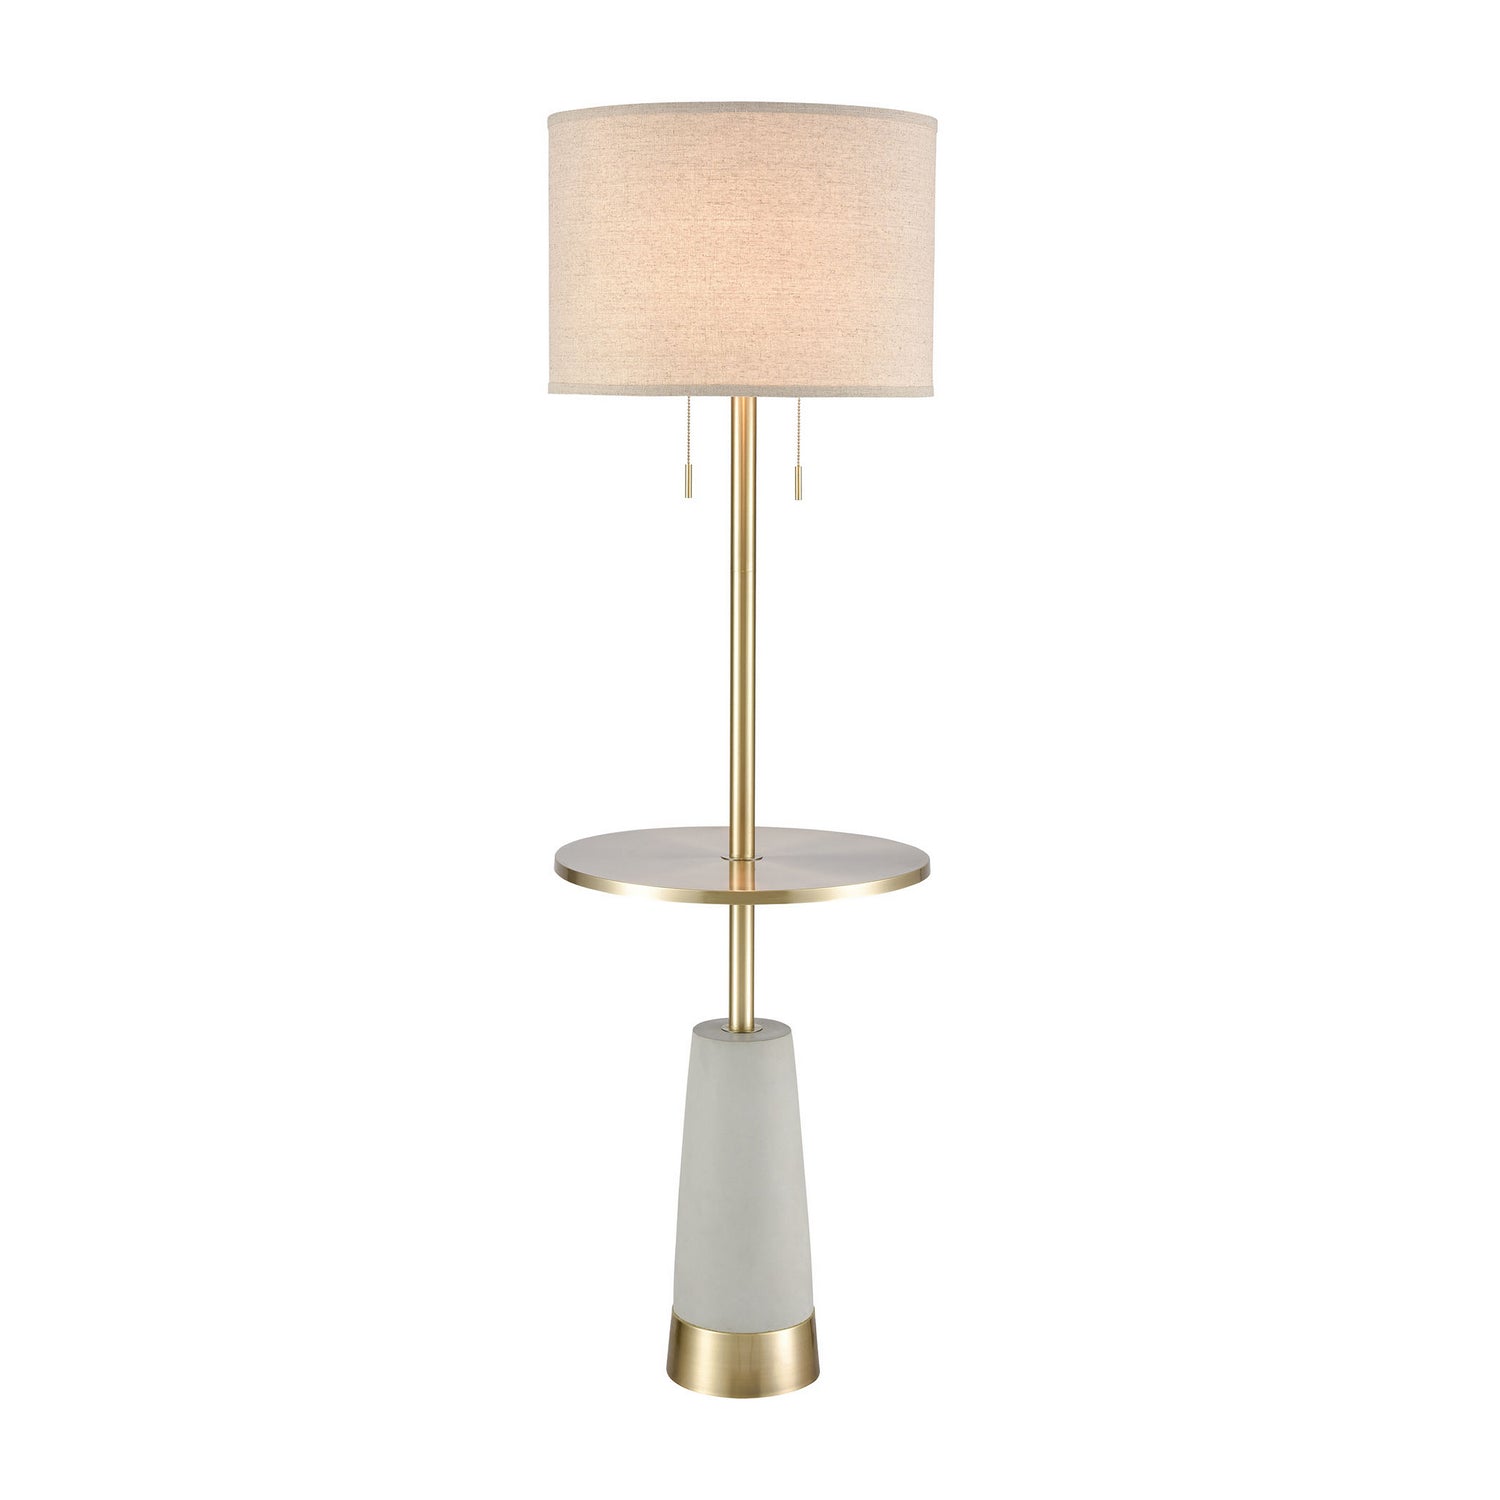 ELK Home - 77129 - Two Light Floor Lamp - Below the Surface - Polished Concrete